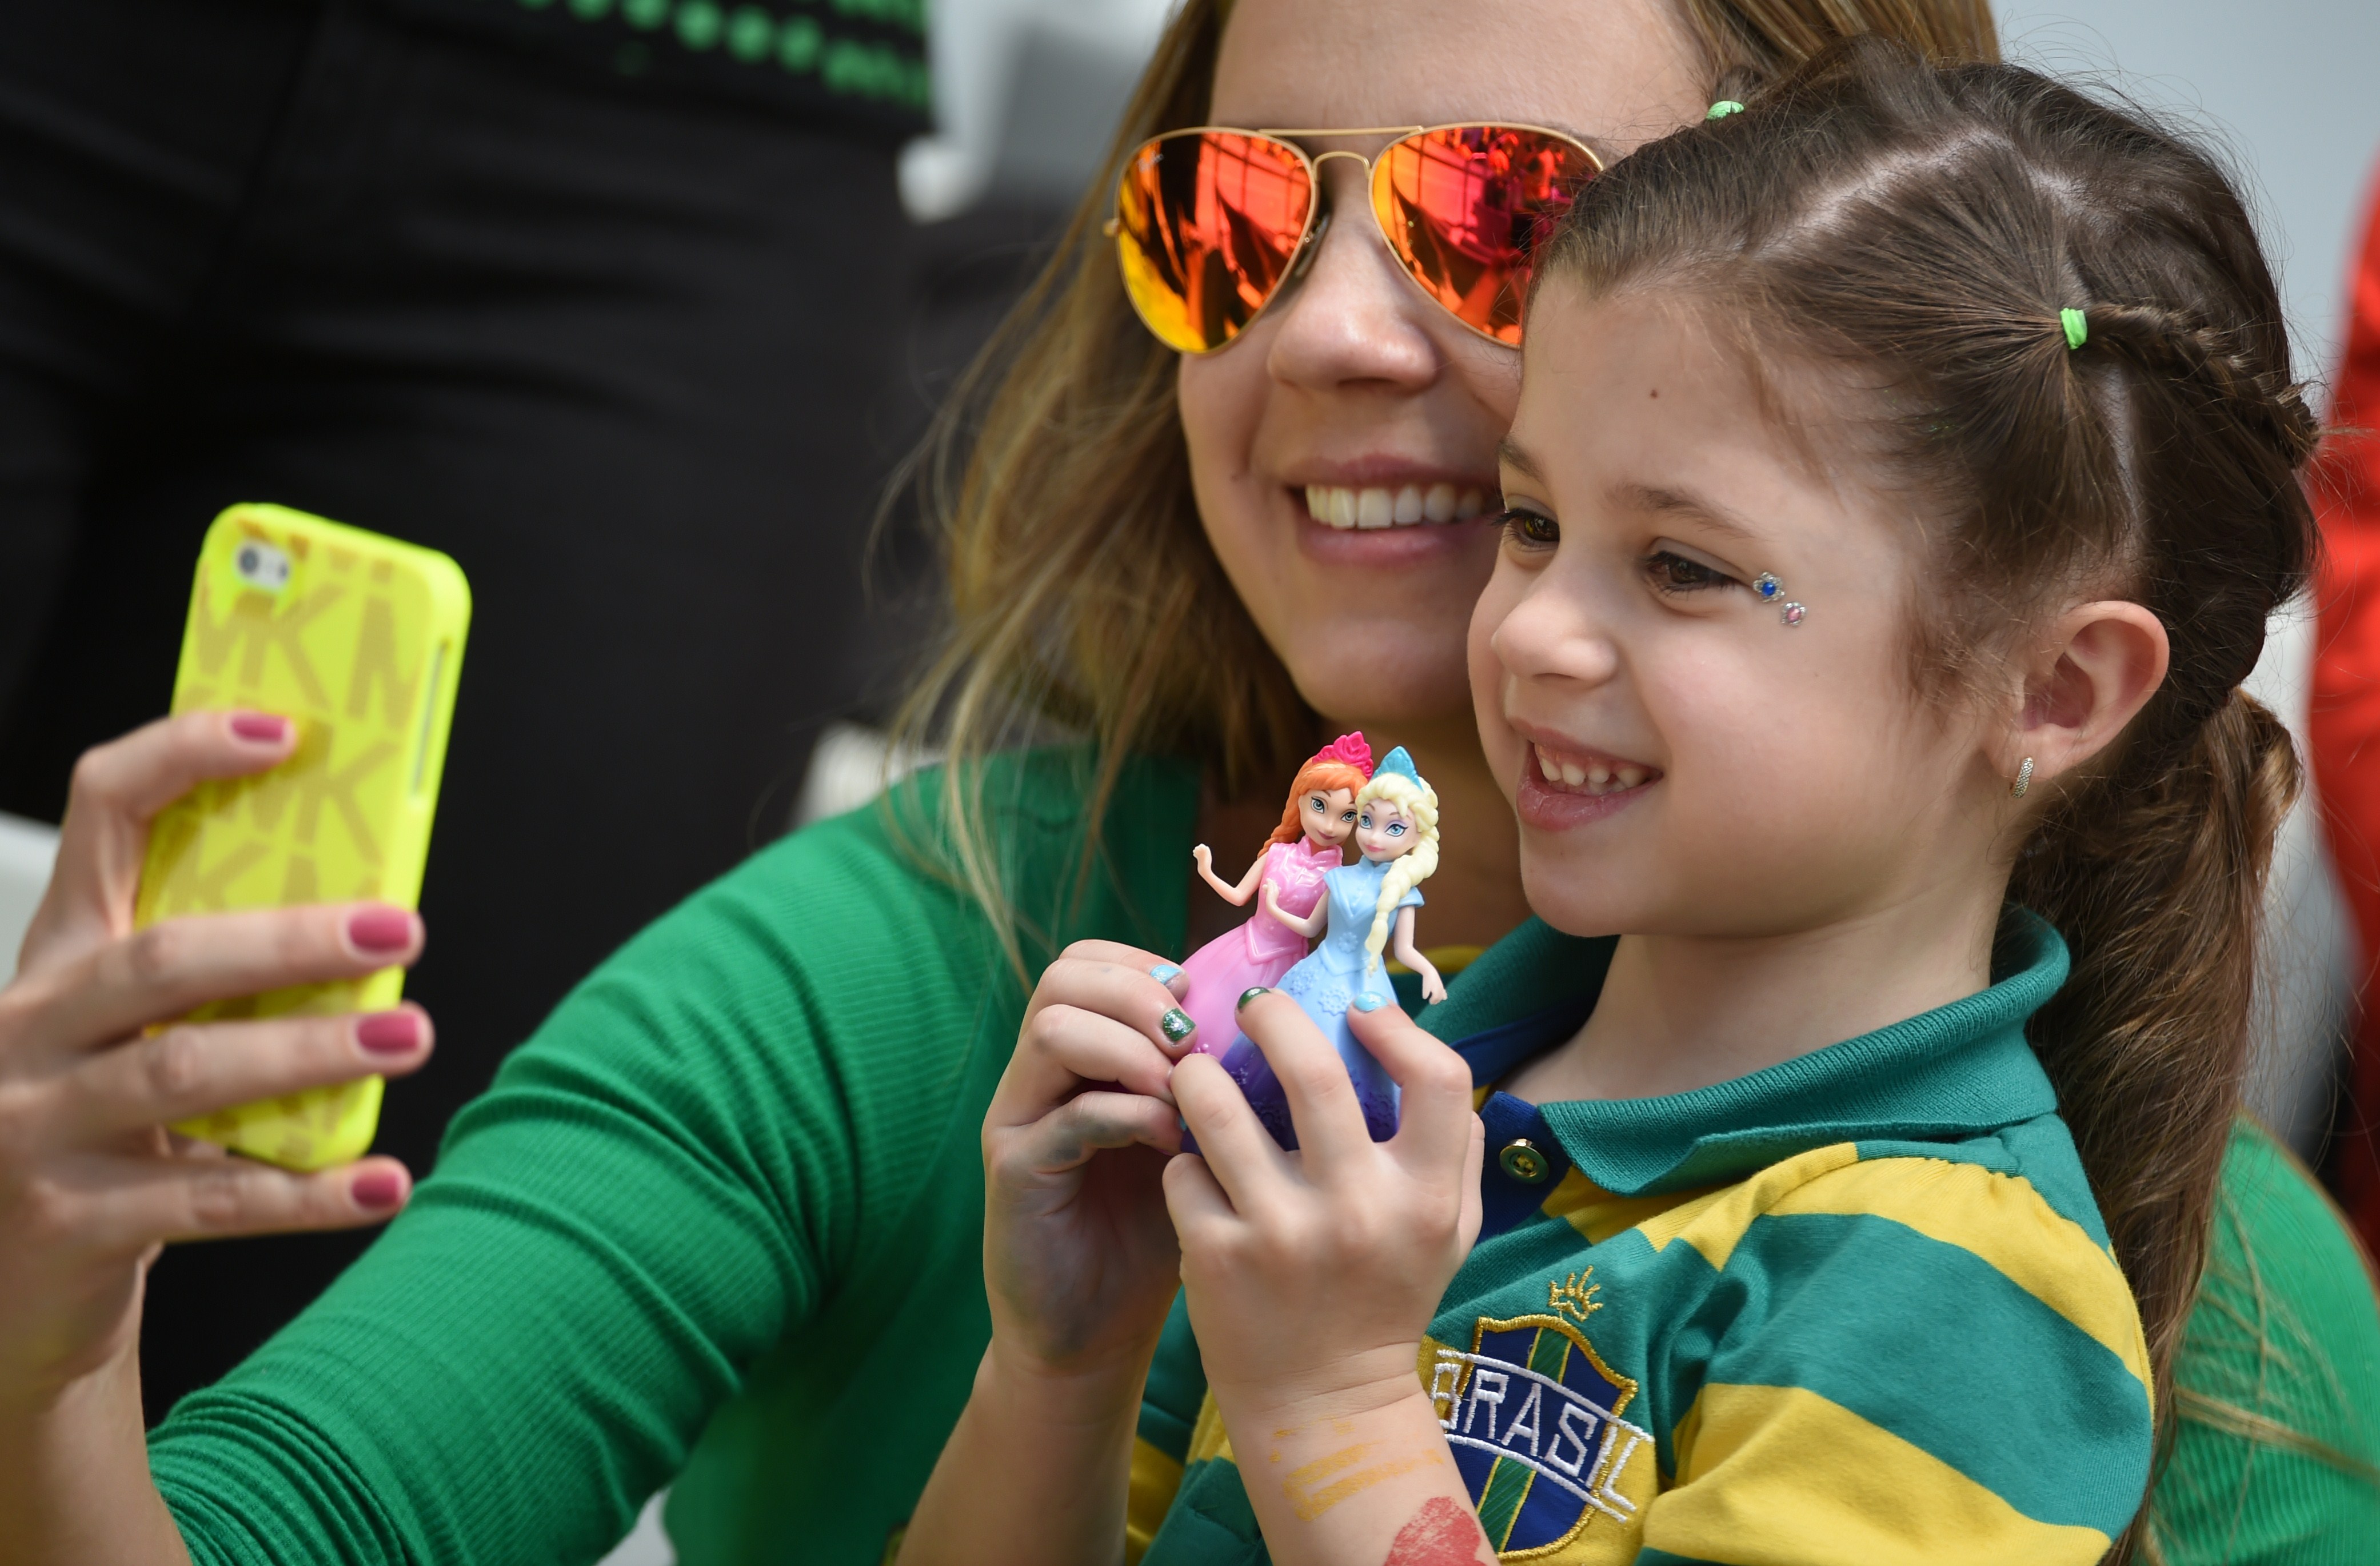 Australian fans take a picture with a smartphone before a Group B football match between Australia and Spain at the Baixada Arena in Curitiba during the 2014 FIFA World Cup on June 23, 2014. (William West&mdash;AFP/Getty Images)